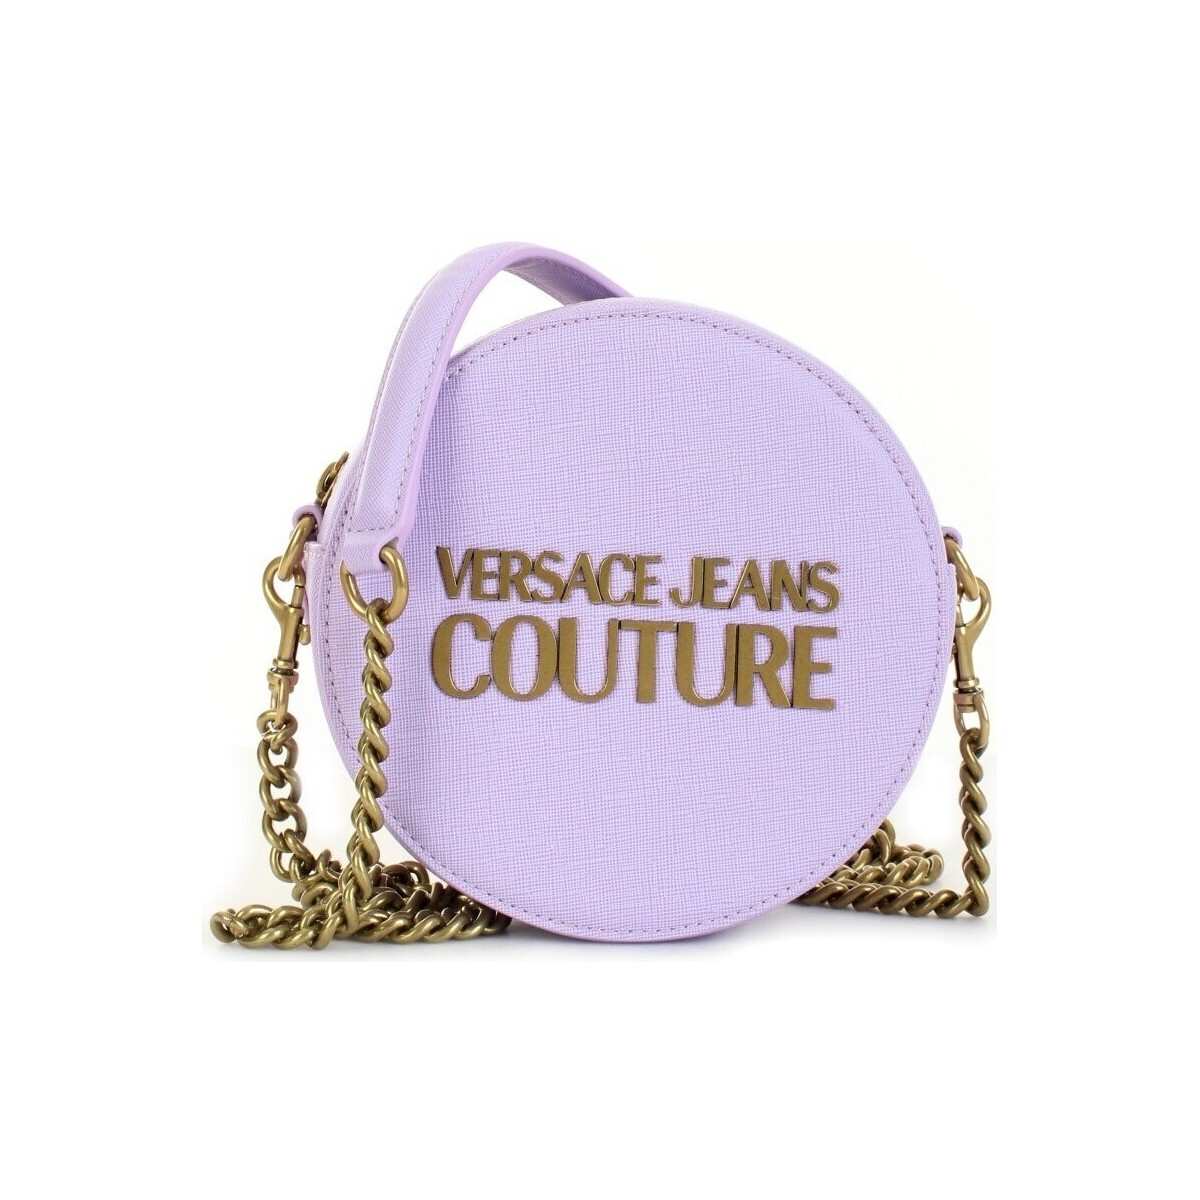 Versace Jeans Couture  Τσάντες Χειρός Versace Jeans Couture 72VA4BL4-71879